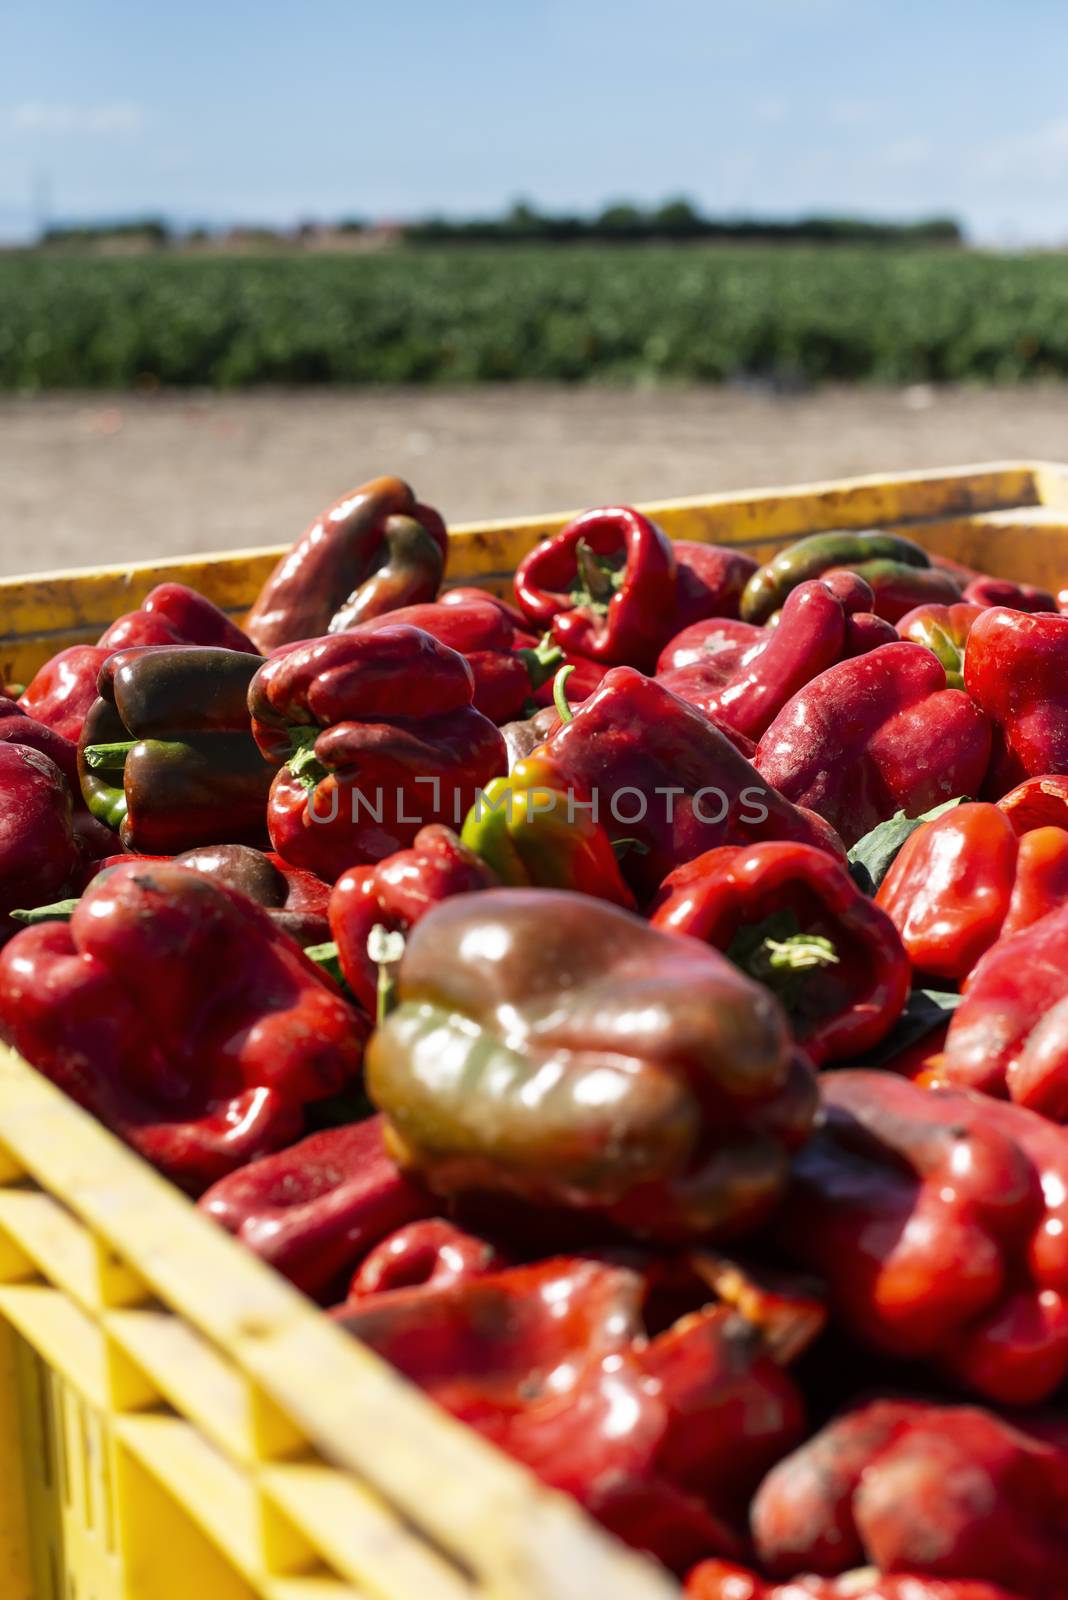 Mature big red peppers in crate ready for transport from the far by deyan_georgiev